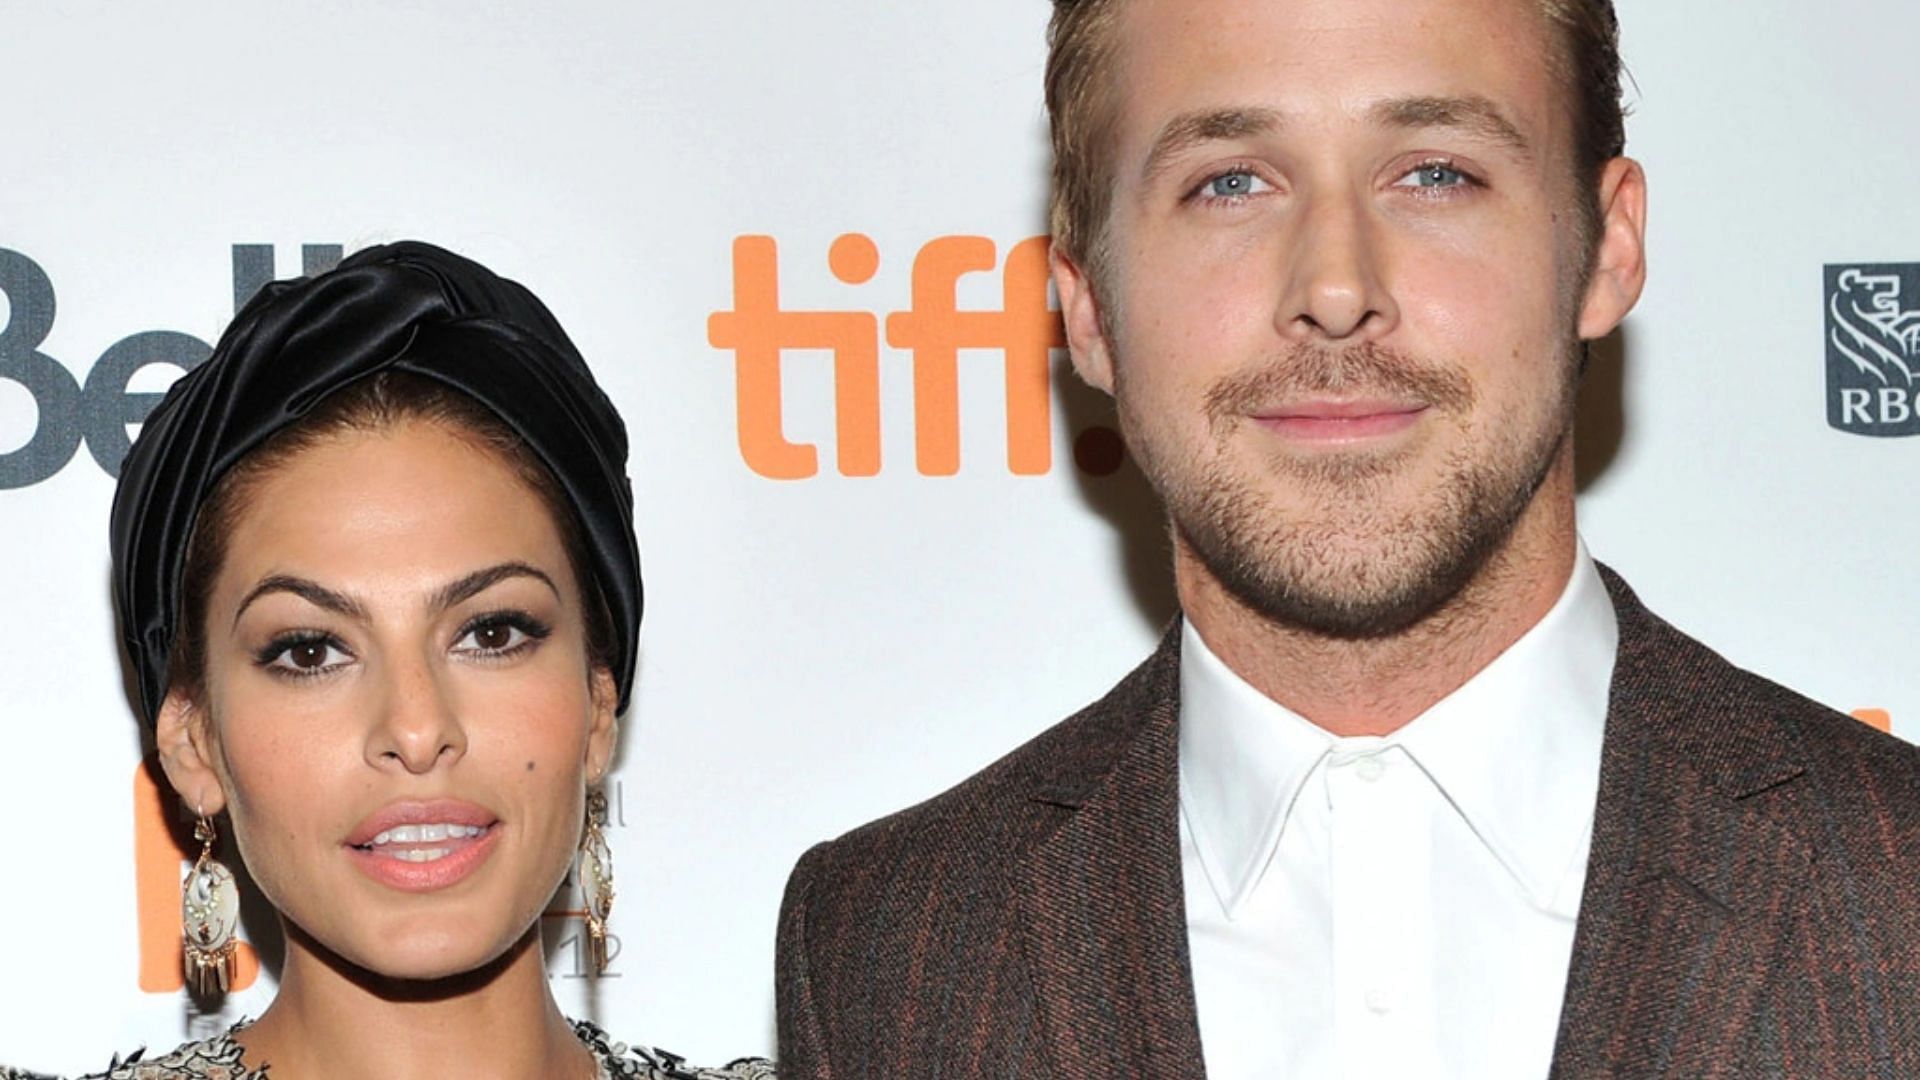 Ryan Gosling and Eva Mendes have been together for more than a decade (Image via Getty Images/ Sonia Recchia)